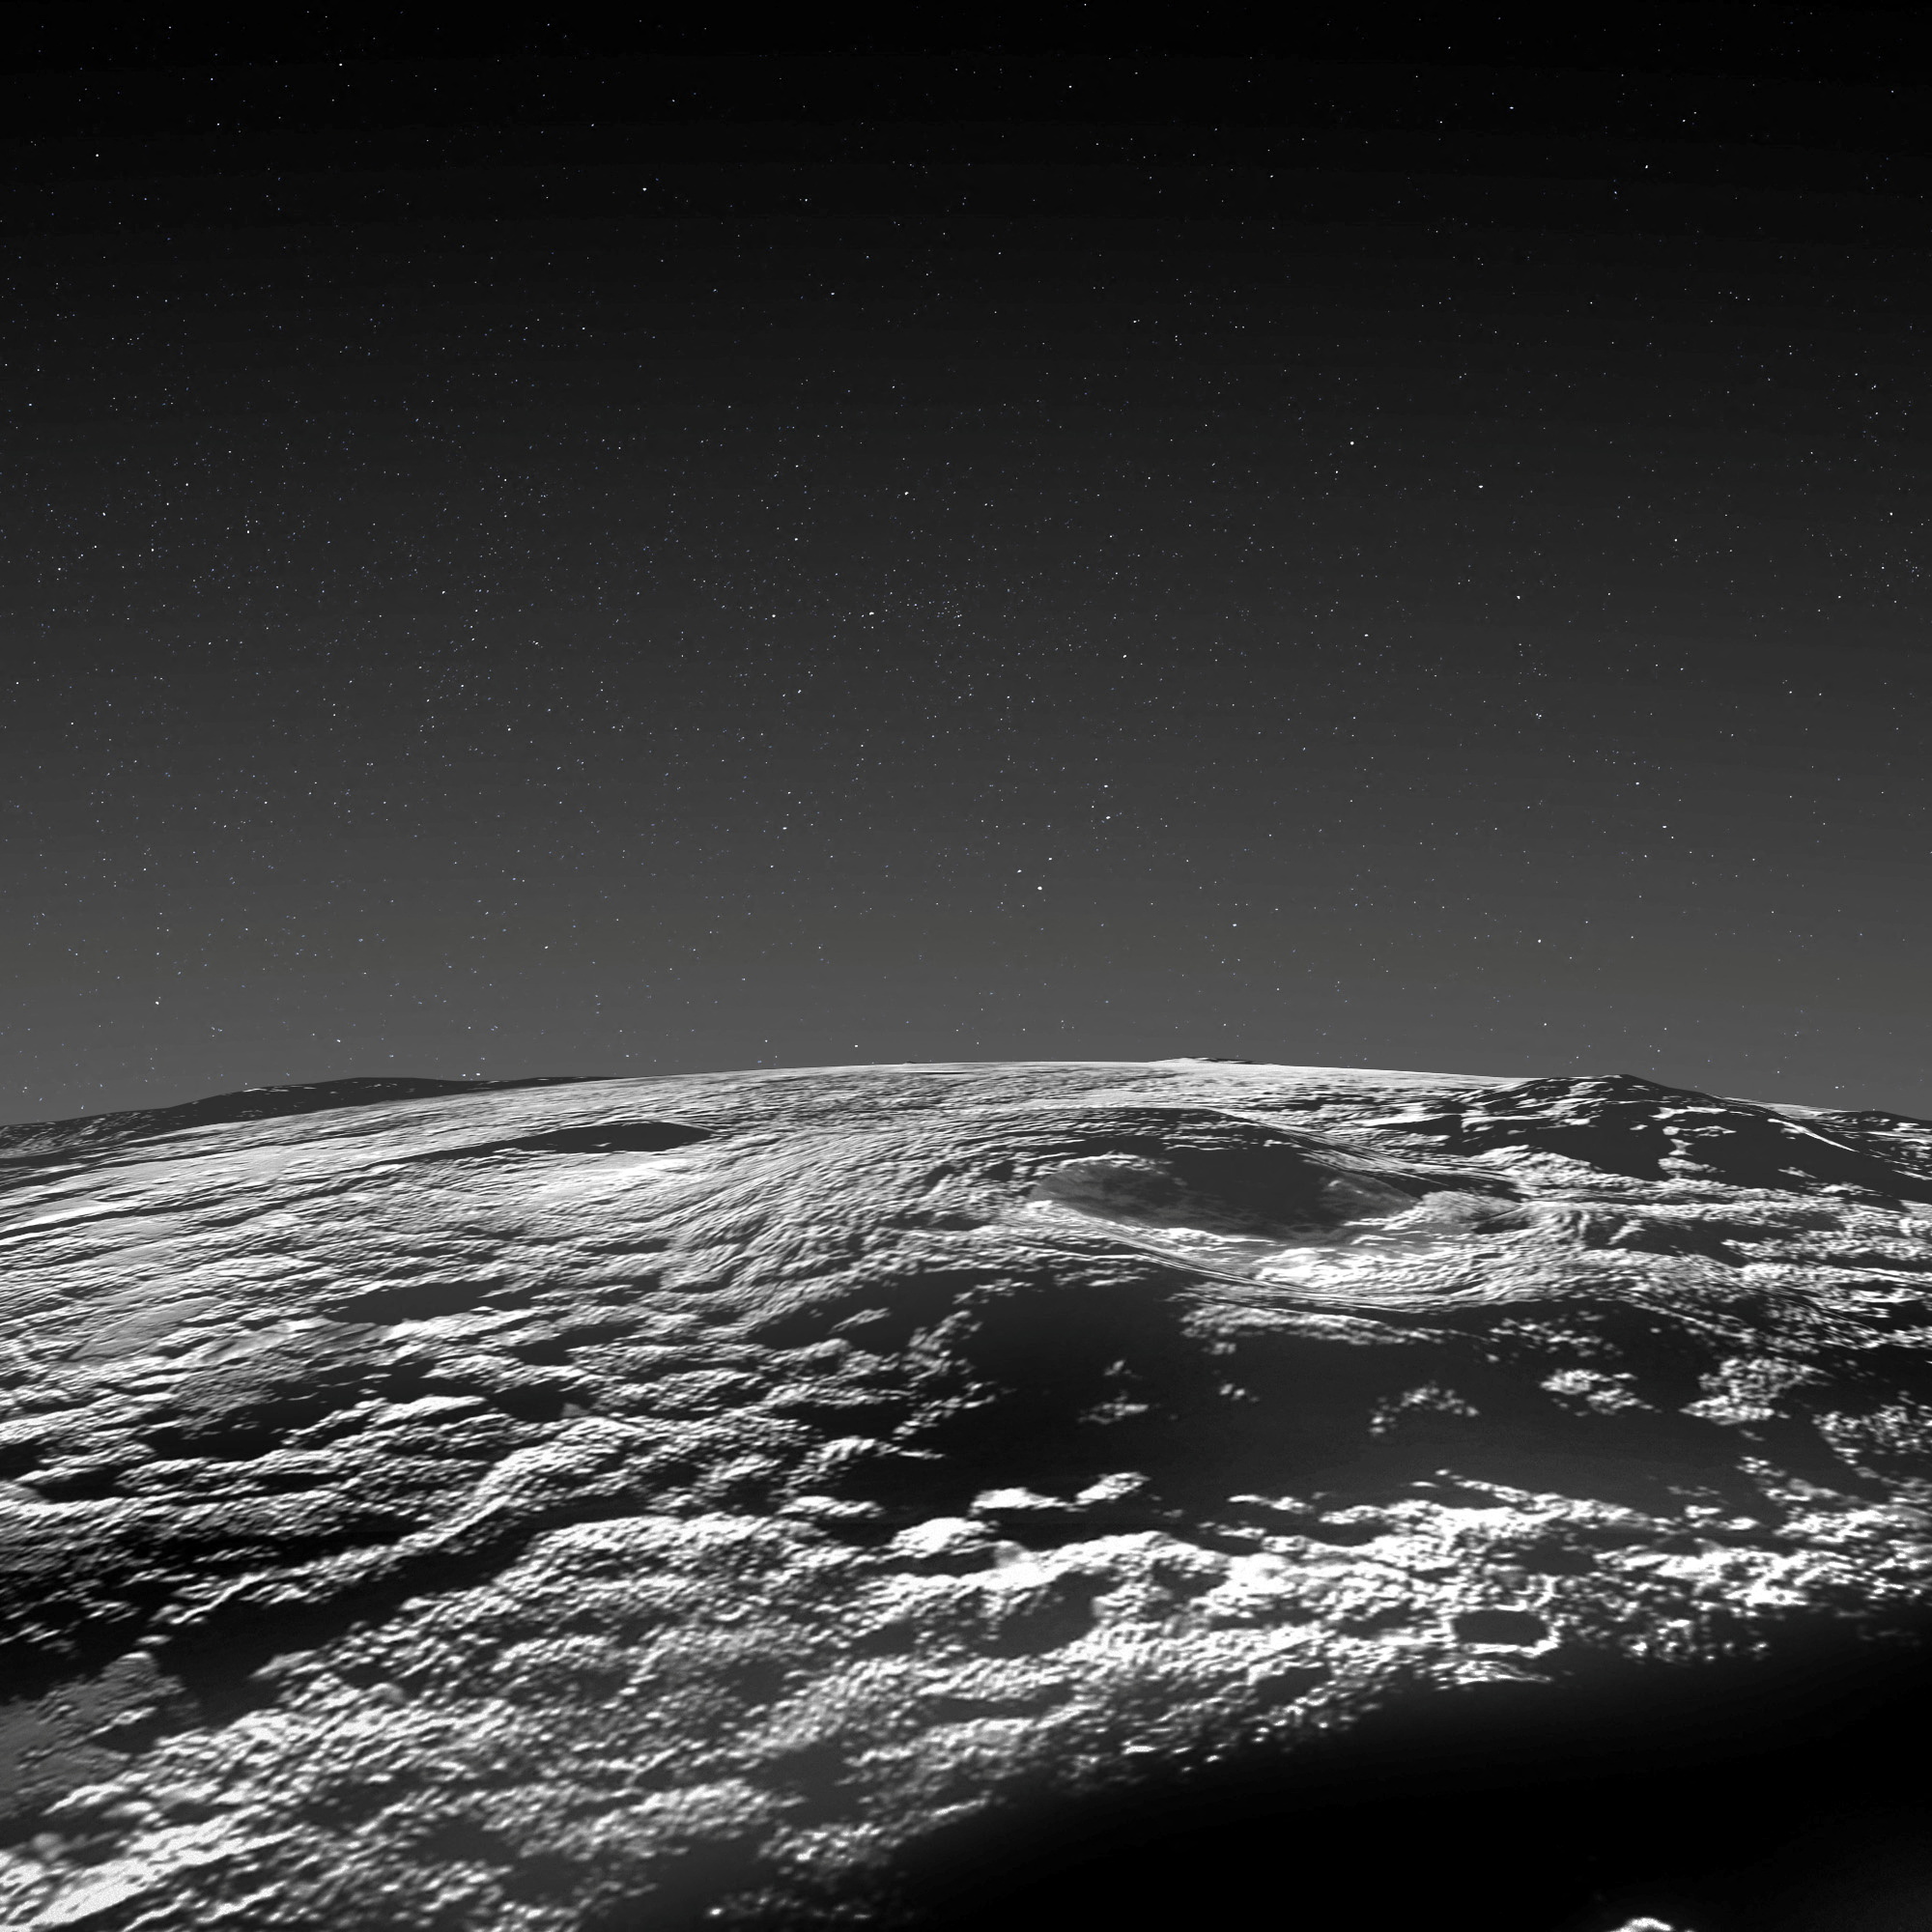 A perspective view of Pluto's icy volcanic region is seen based on 2015 data from the NASA spacecraft New Horizons